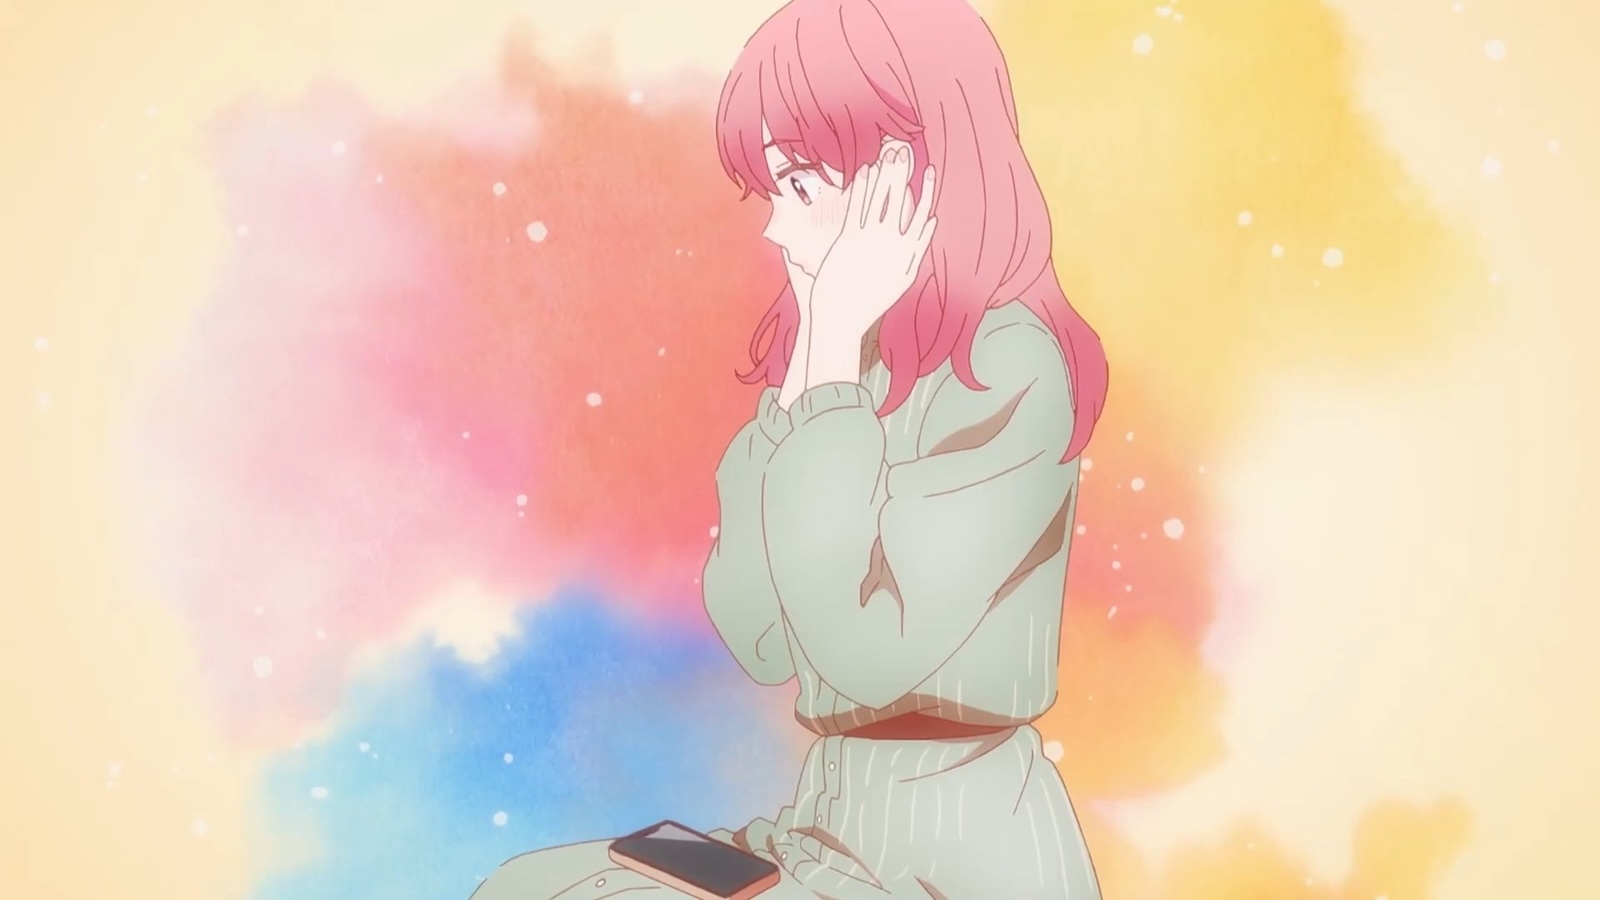 A Sign of Affection, the review of the first episodes of the pleasant shojo available on Crunchyroll